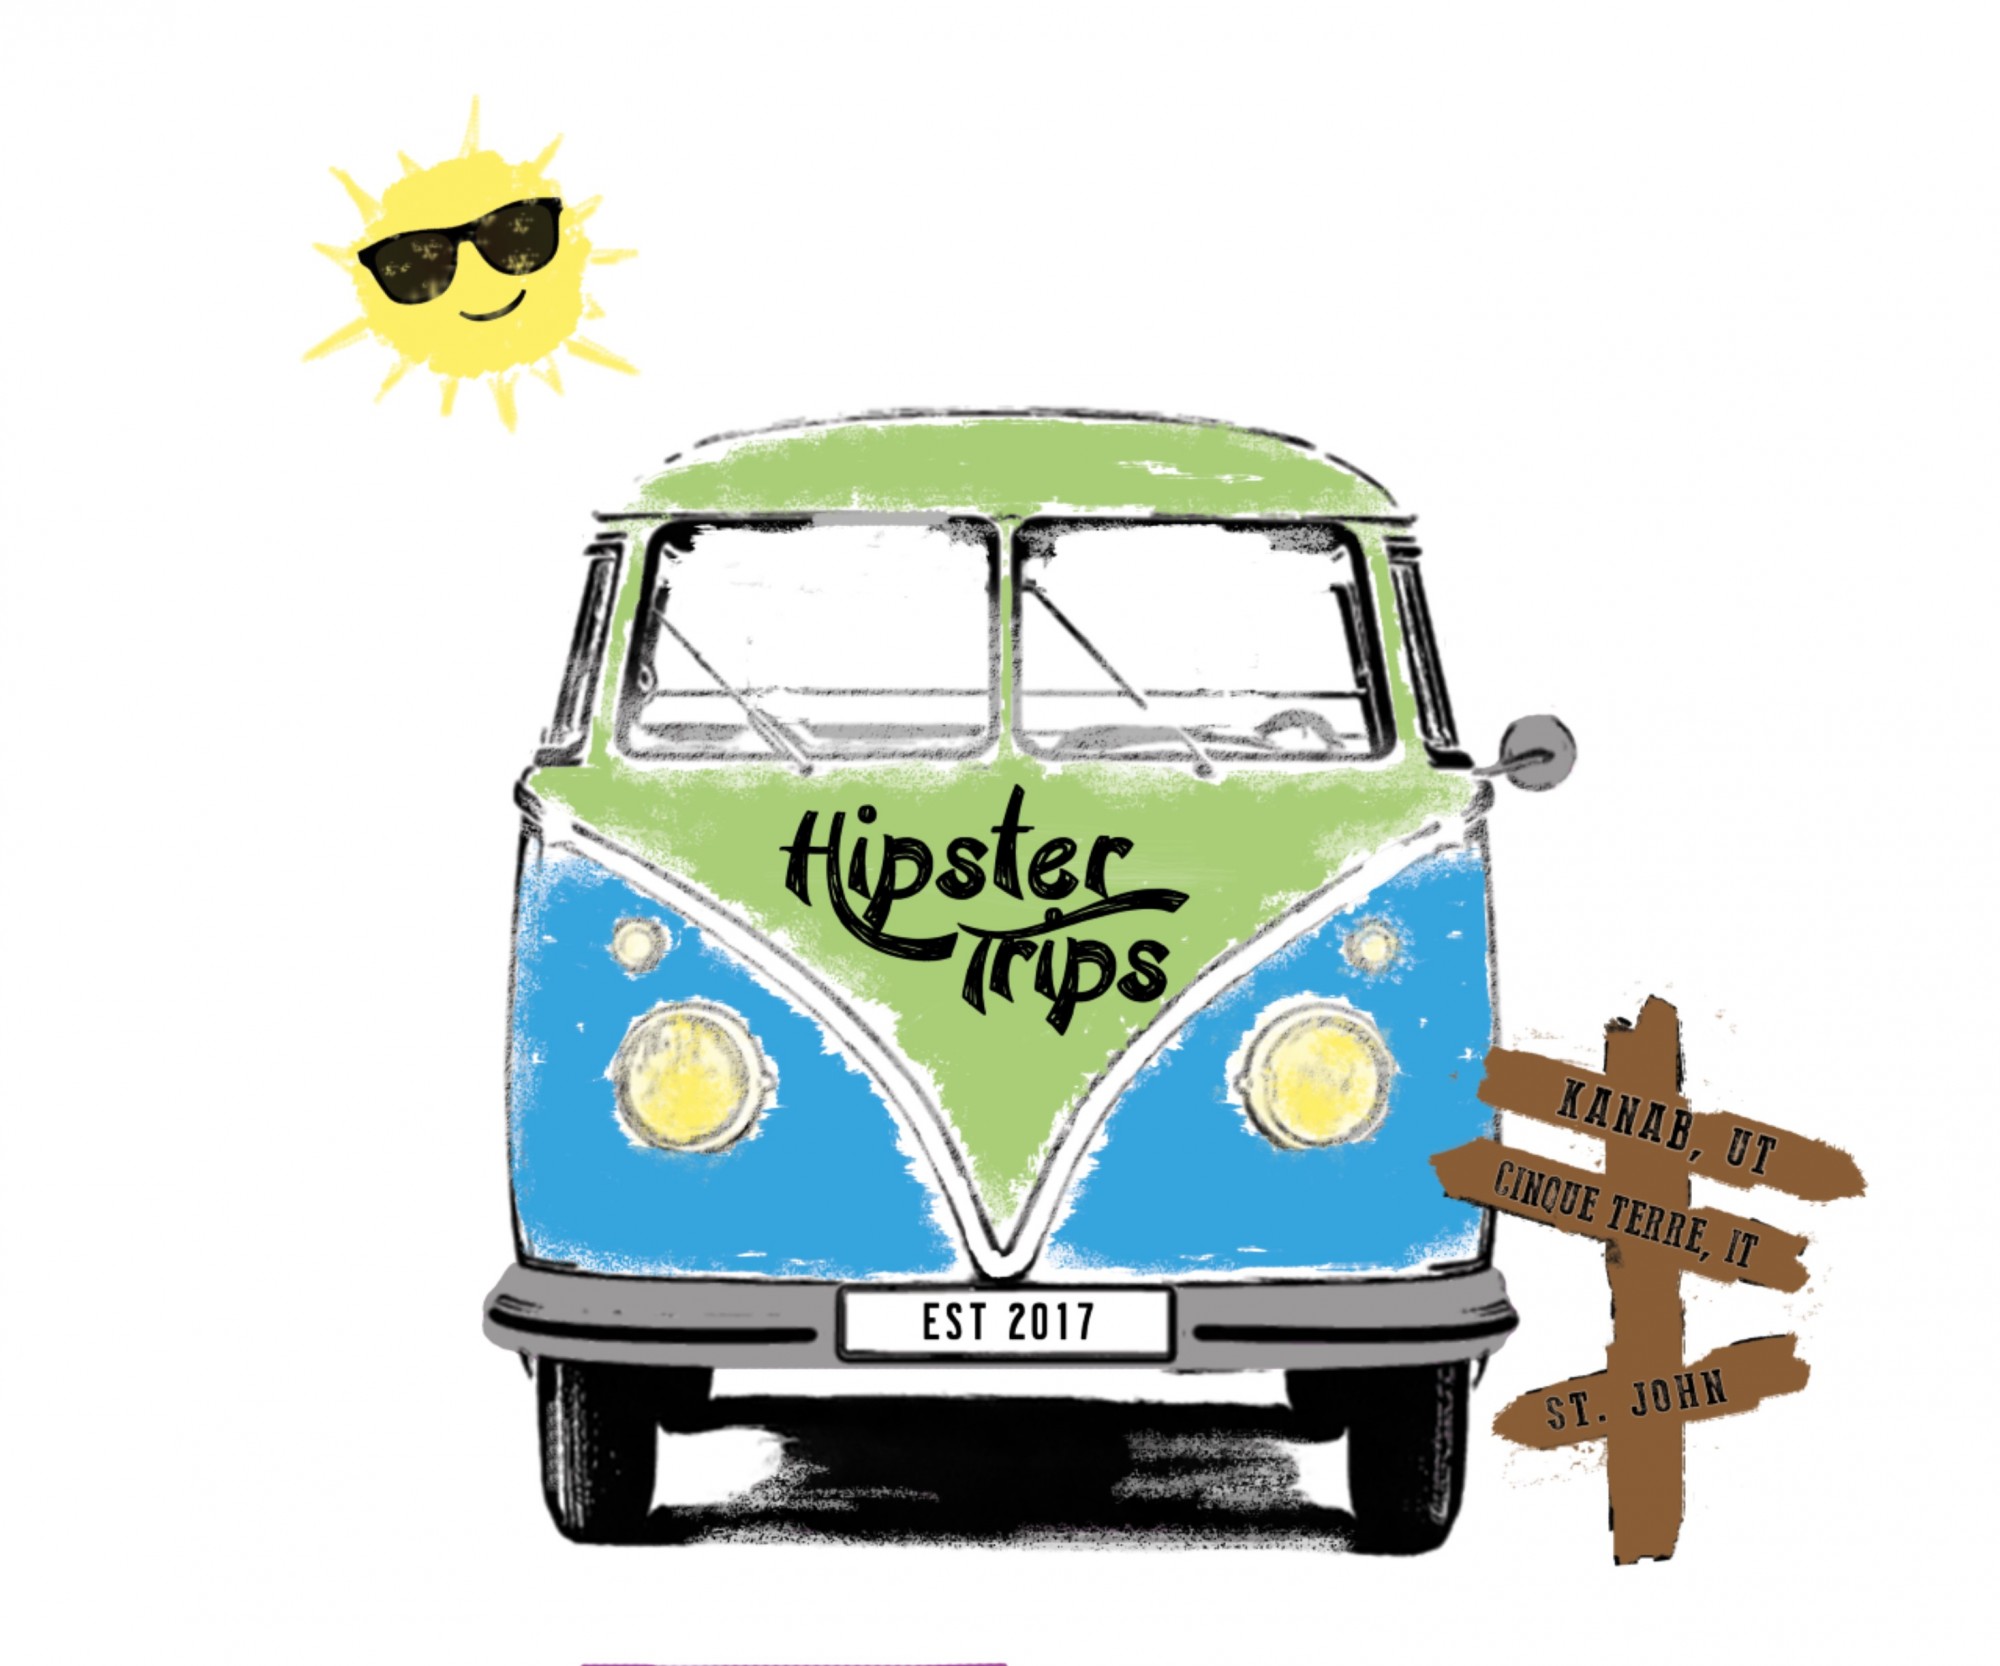 Hipster Trips Travel Company